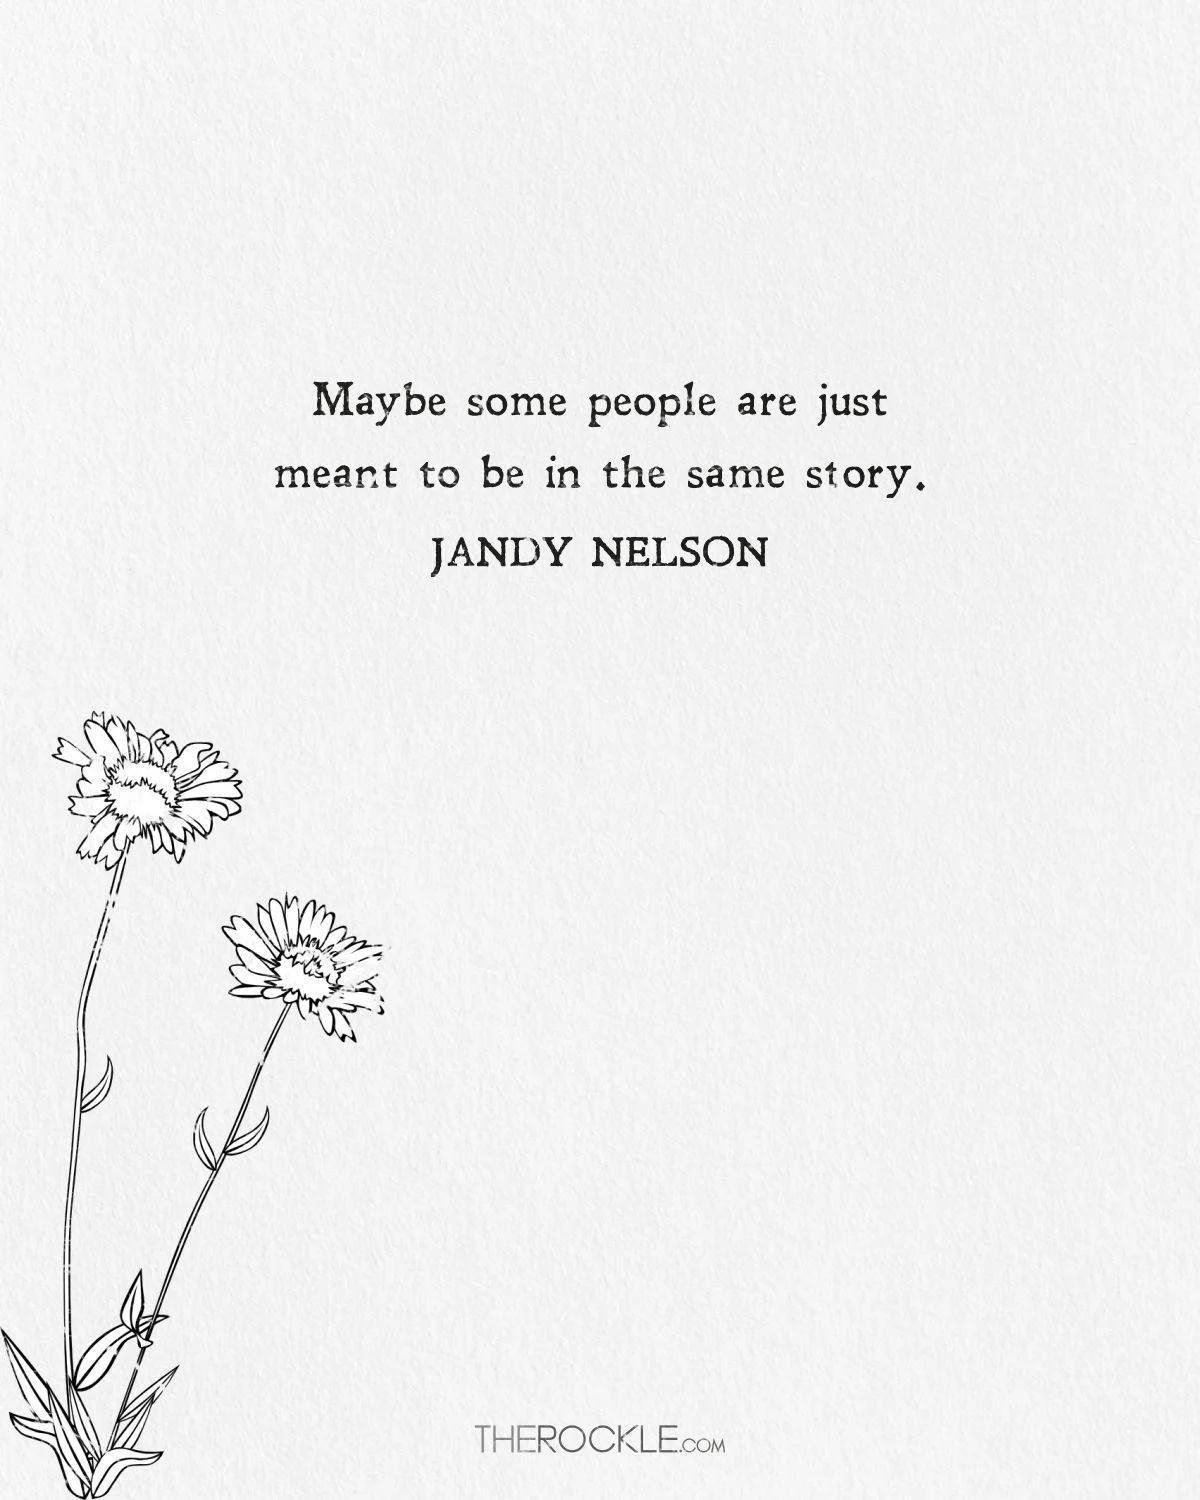 Jandy Nelson quote